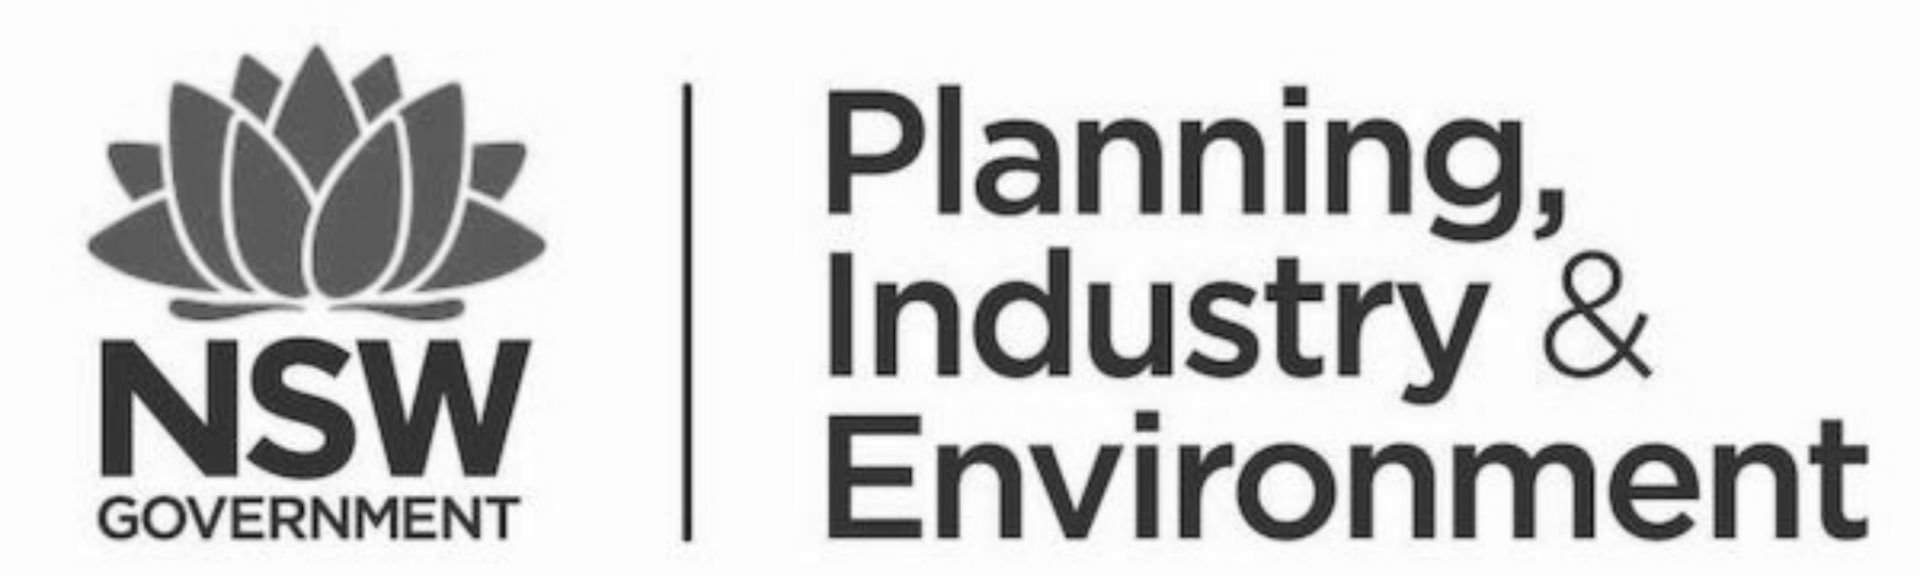 Department of Planning, Industry & Environment NSW